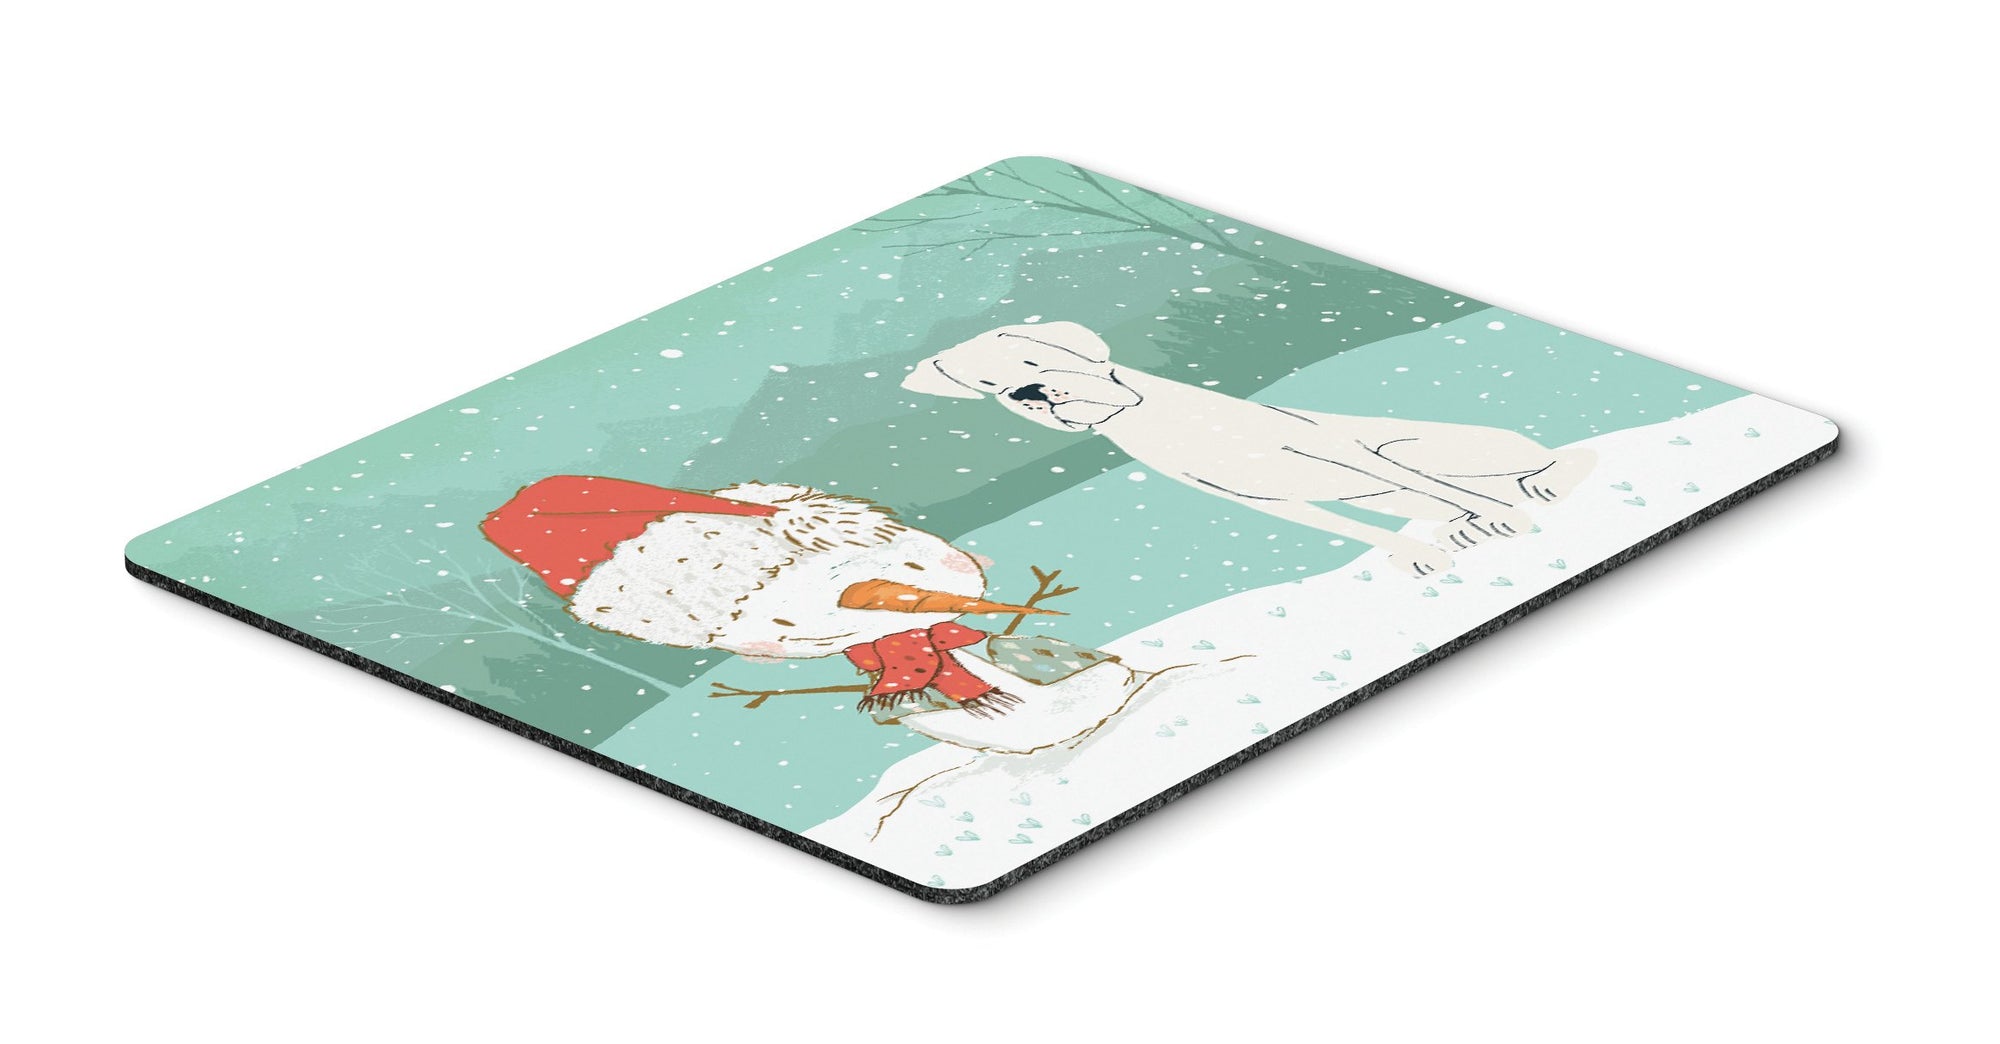 White Boxer and Snowman Christmas Mouse Pad, Hot Pad or Trivet CK2034MP by Caroline's Treasures